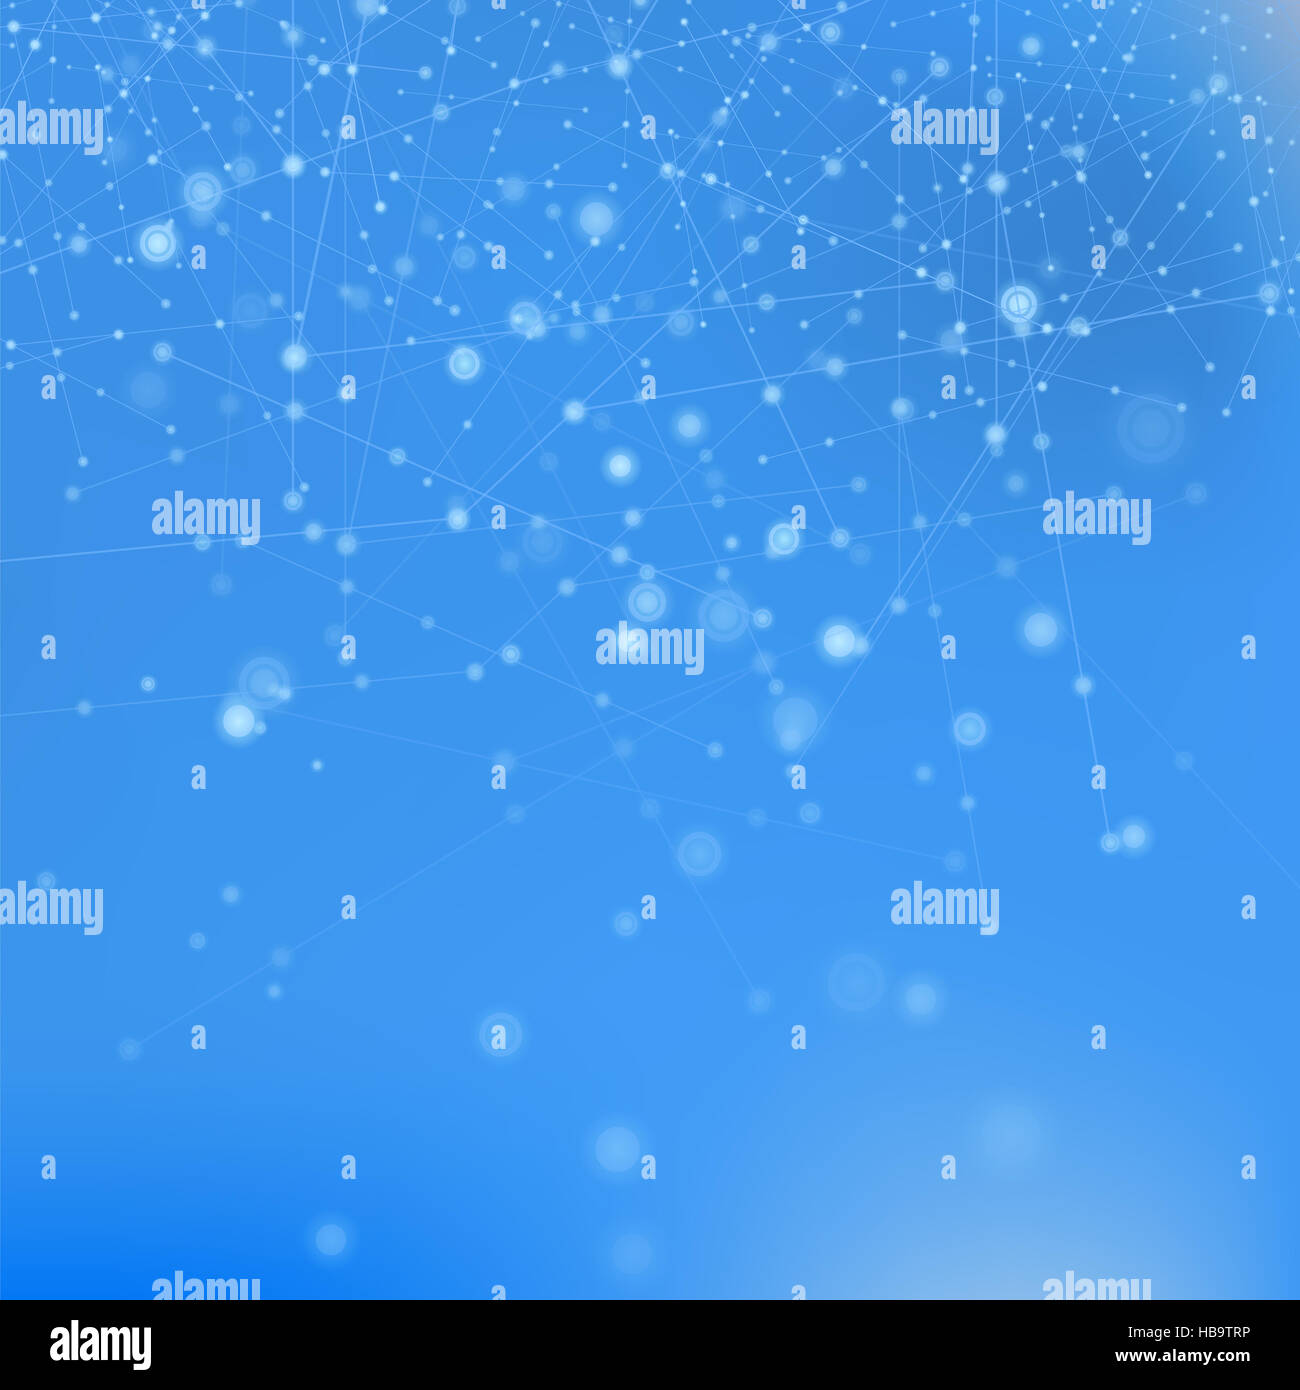 Vector Blue Technology Background Stock Photo